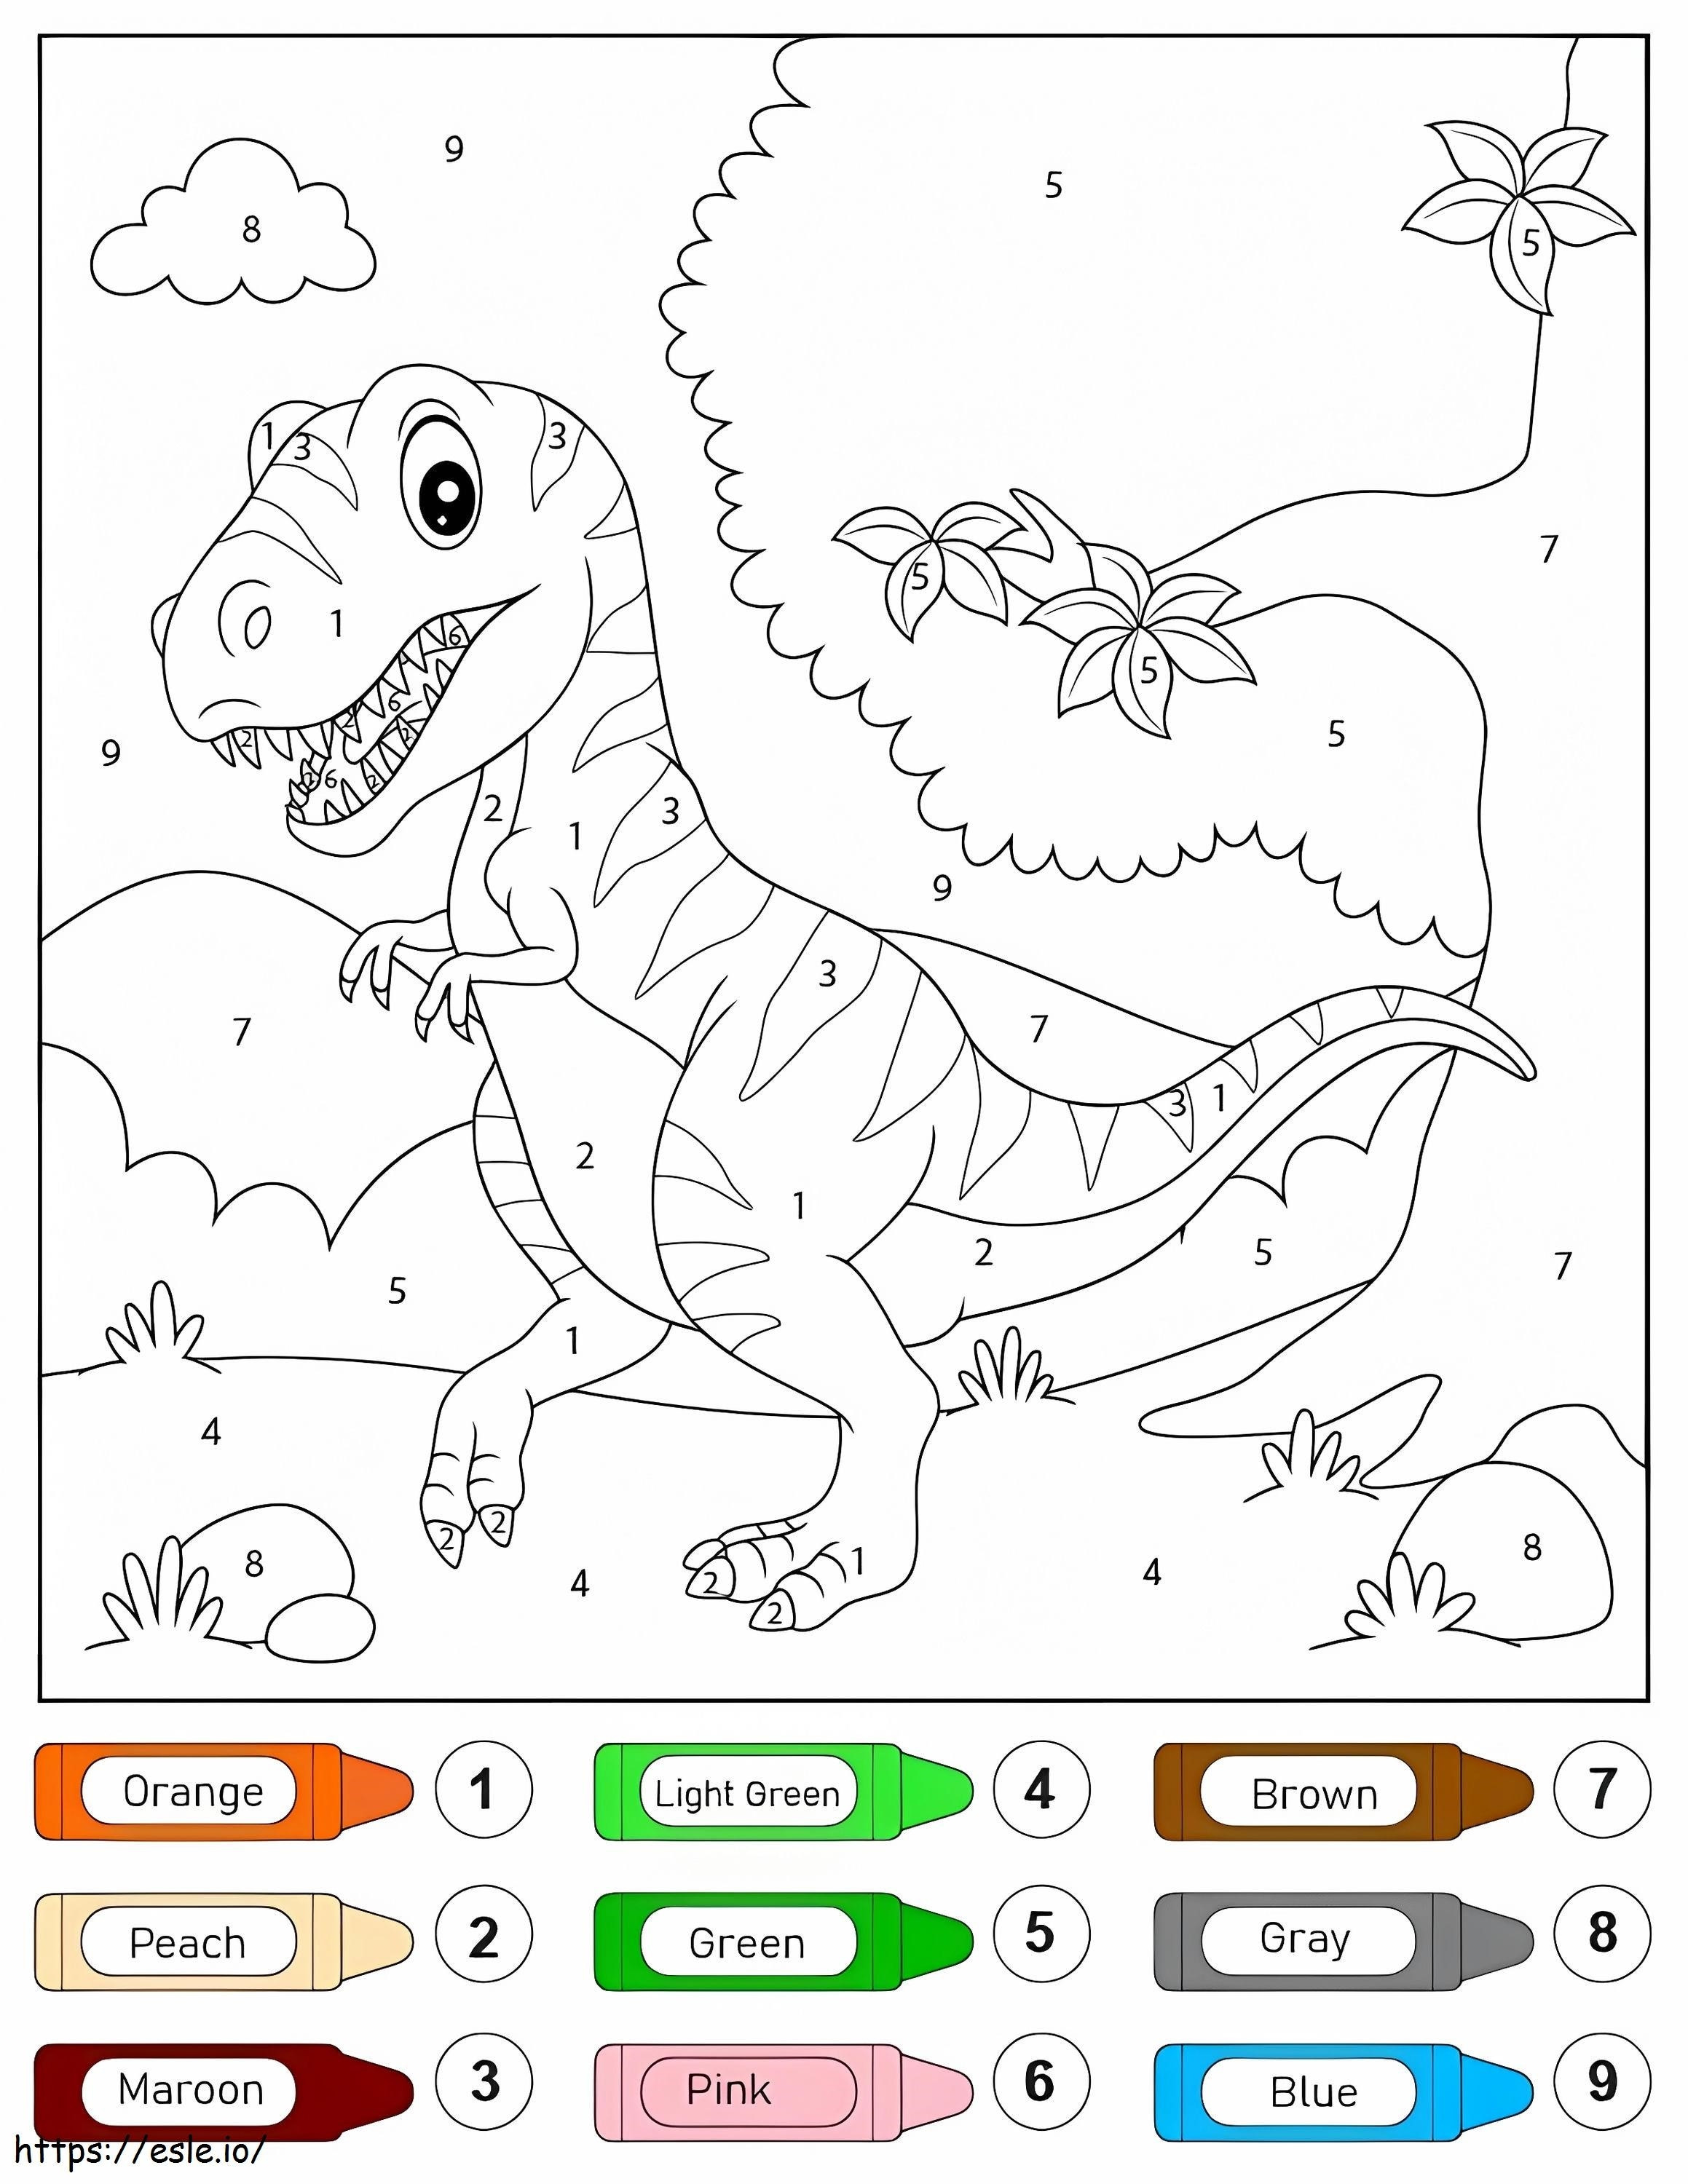 T Rex Dinosaur Color By Number coloring page